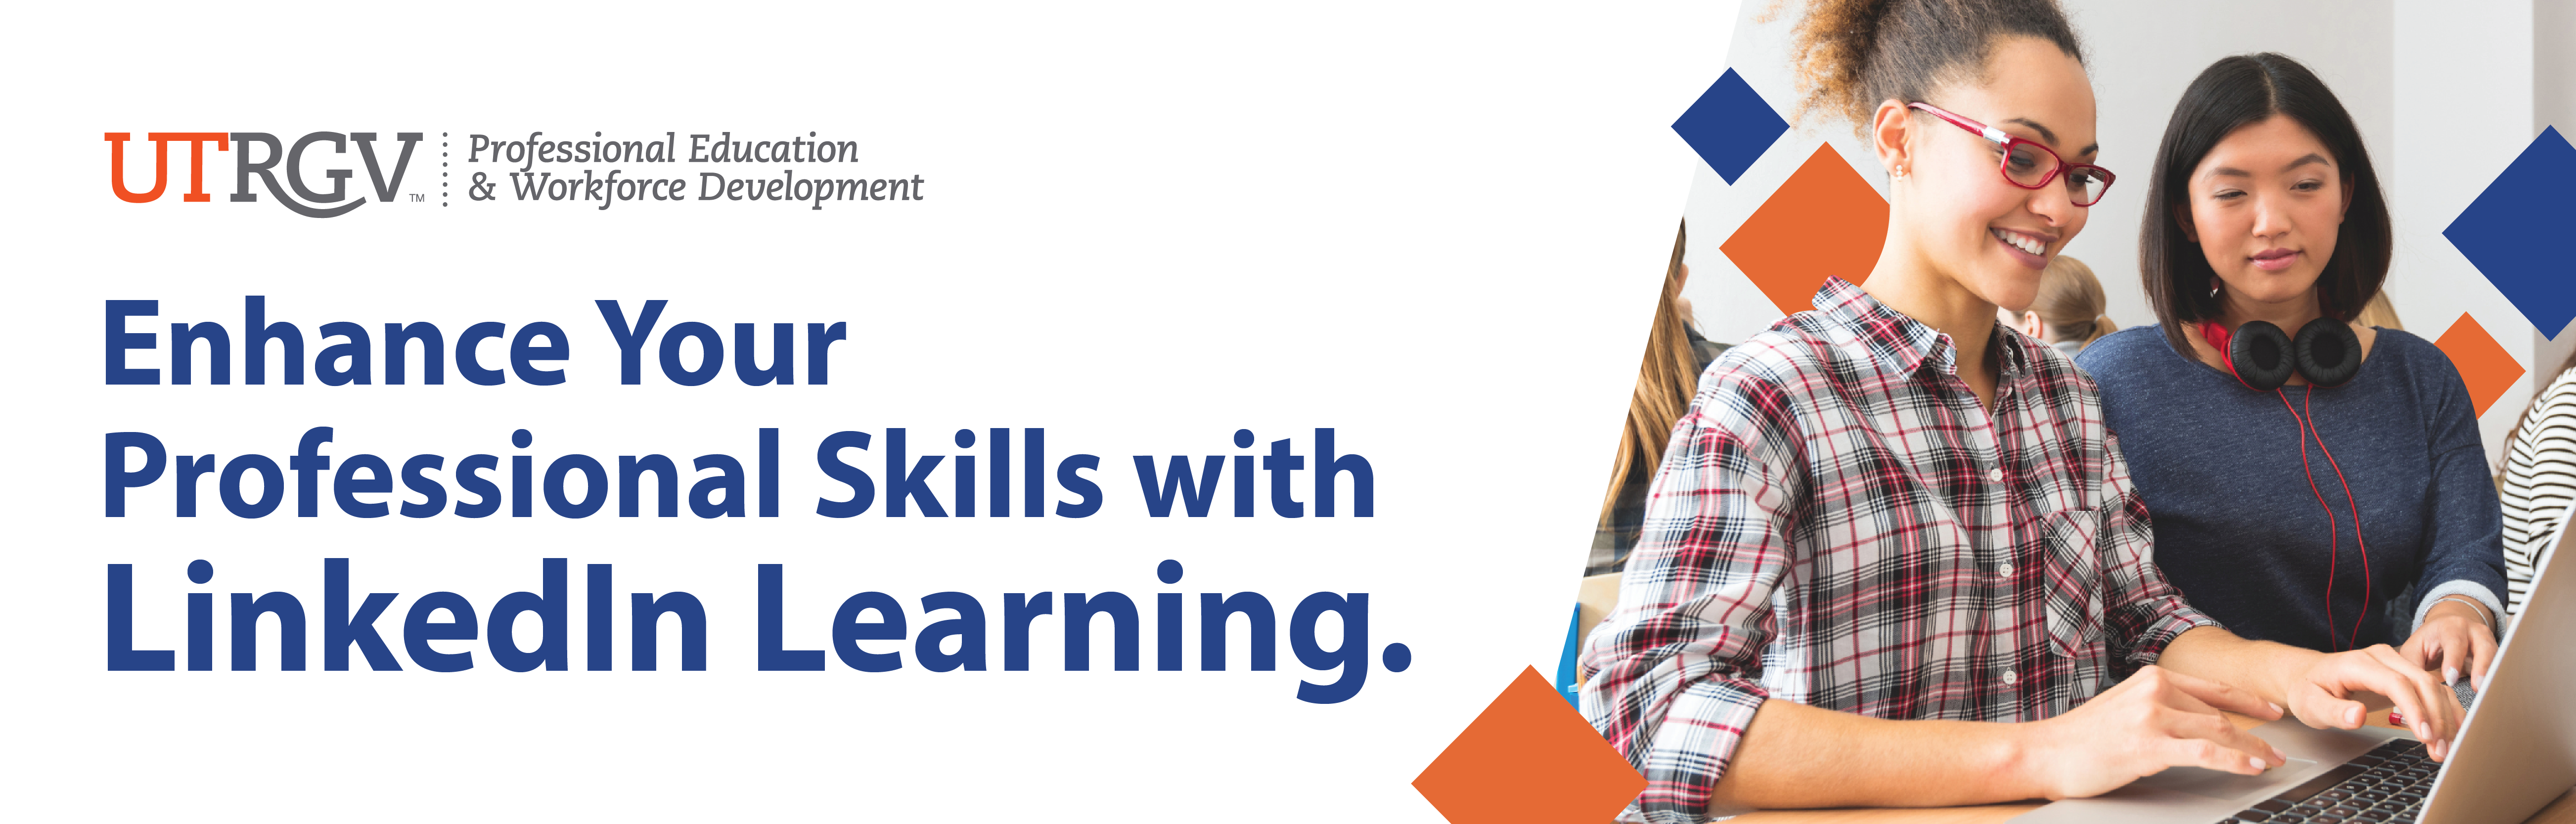 Learn without limits with LinkedIn Learning. Get started.